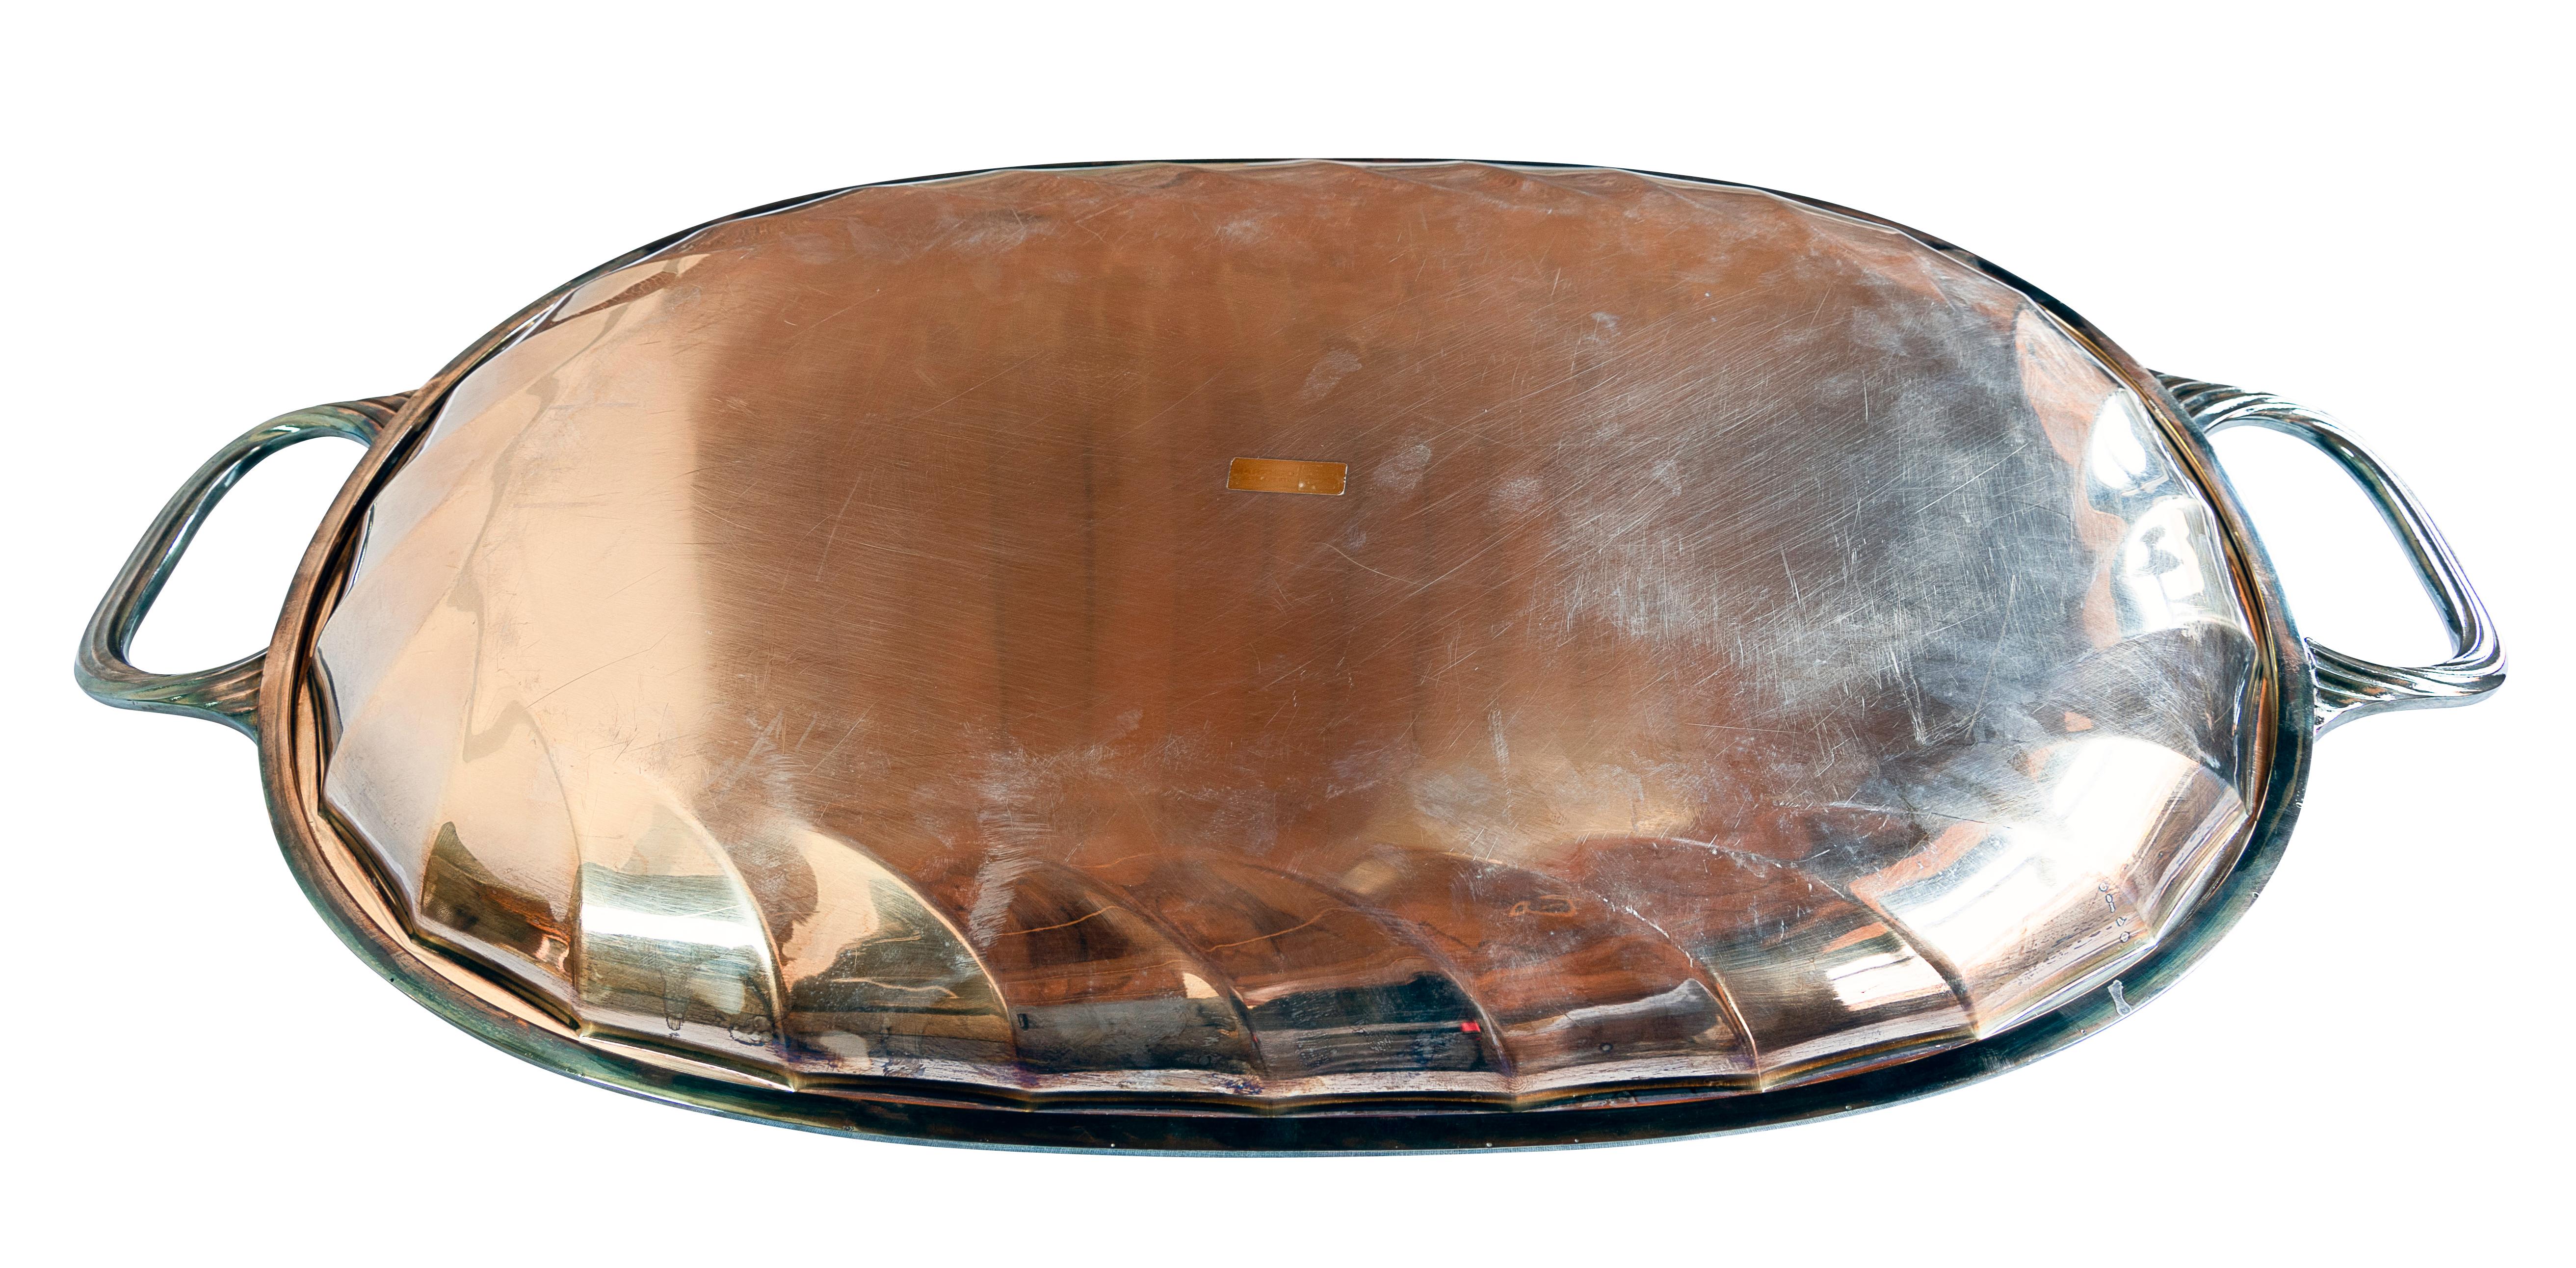 Italian Ricci Argentieri Italy Large Silver Serving Tray, 1950s